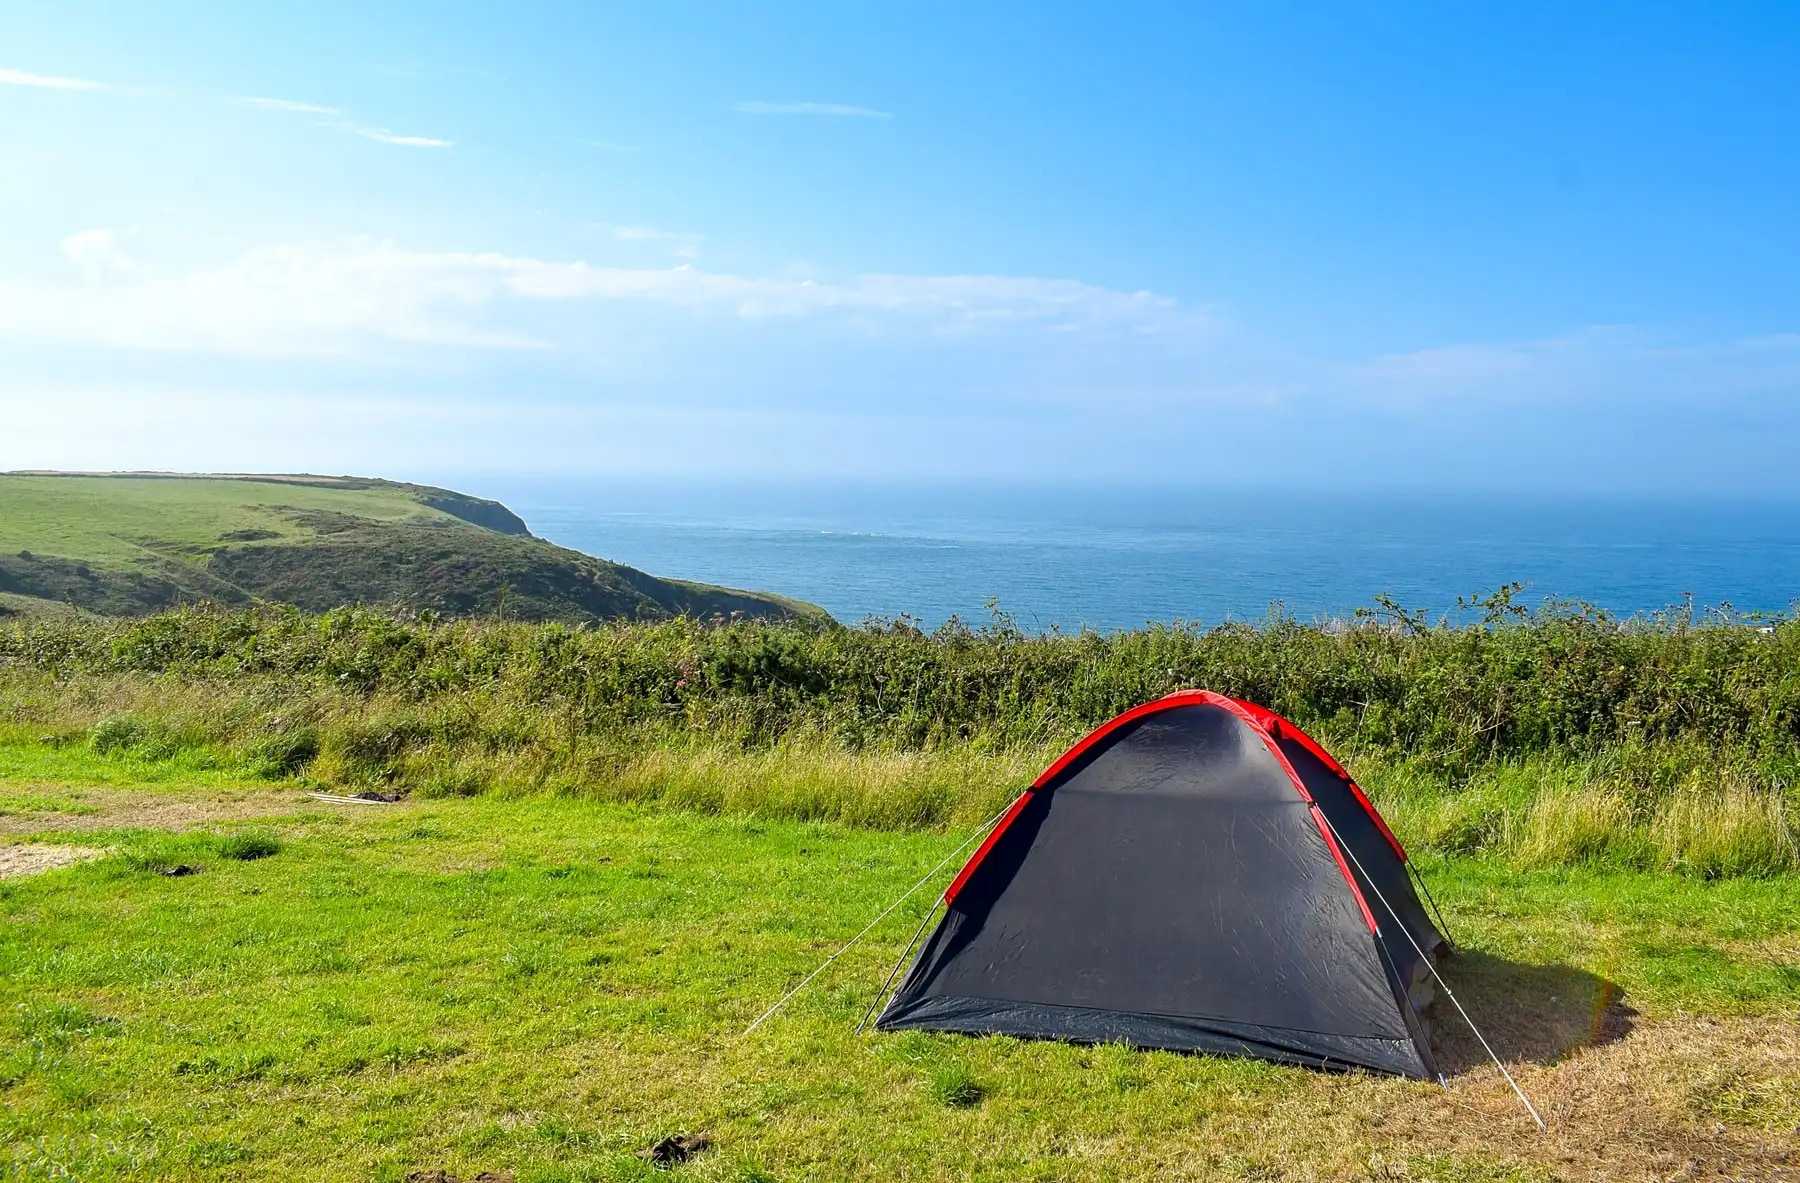 What sort of campsite do your competitors operate?